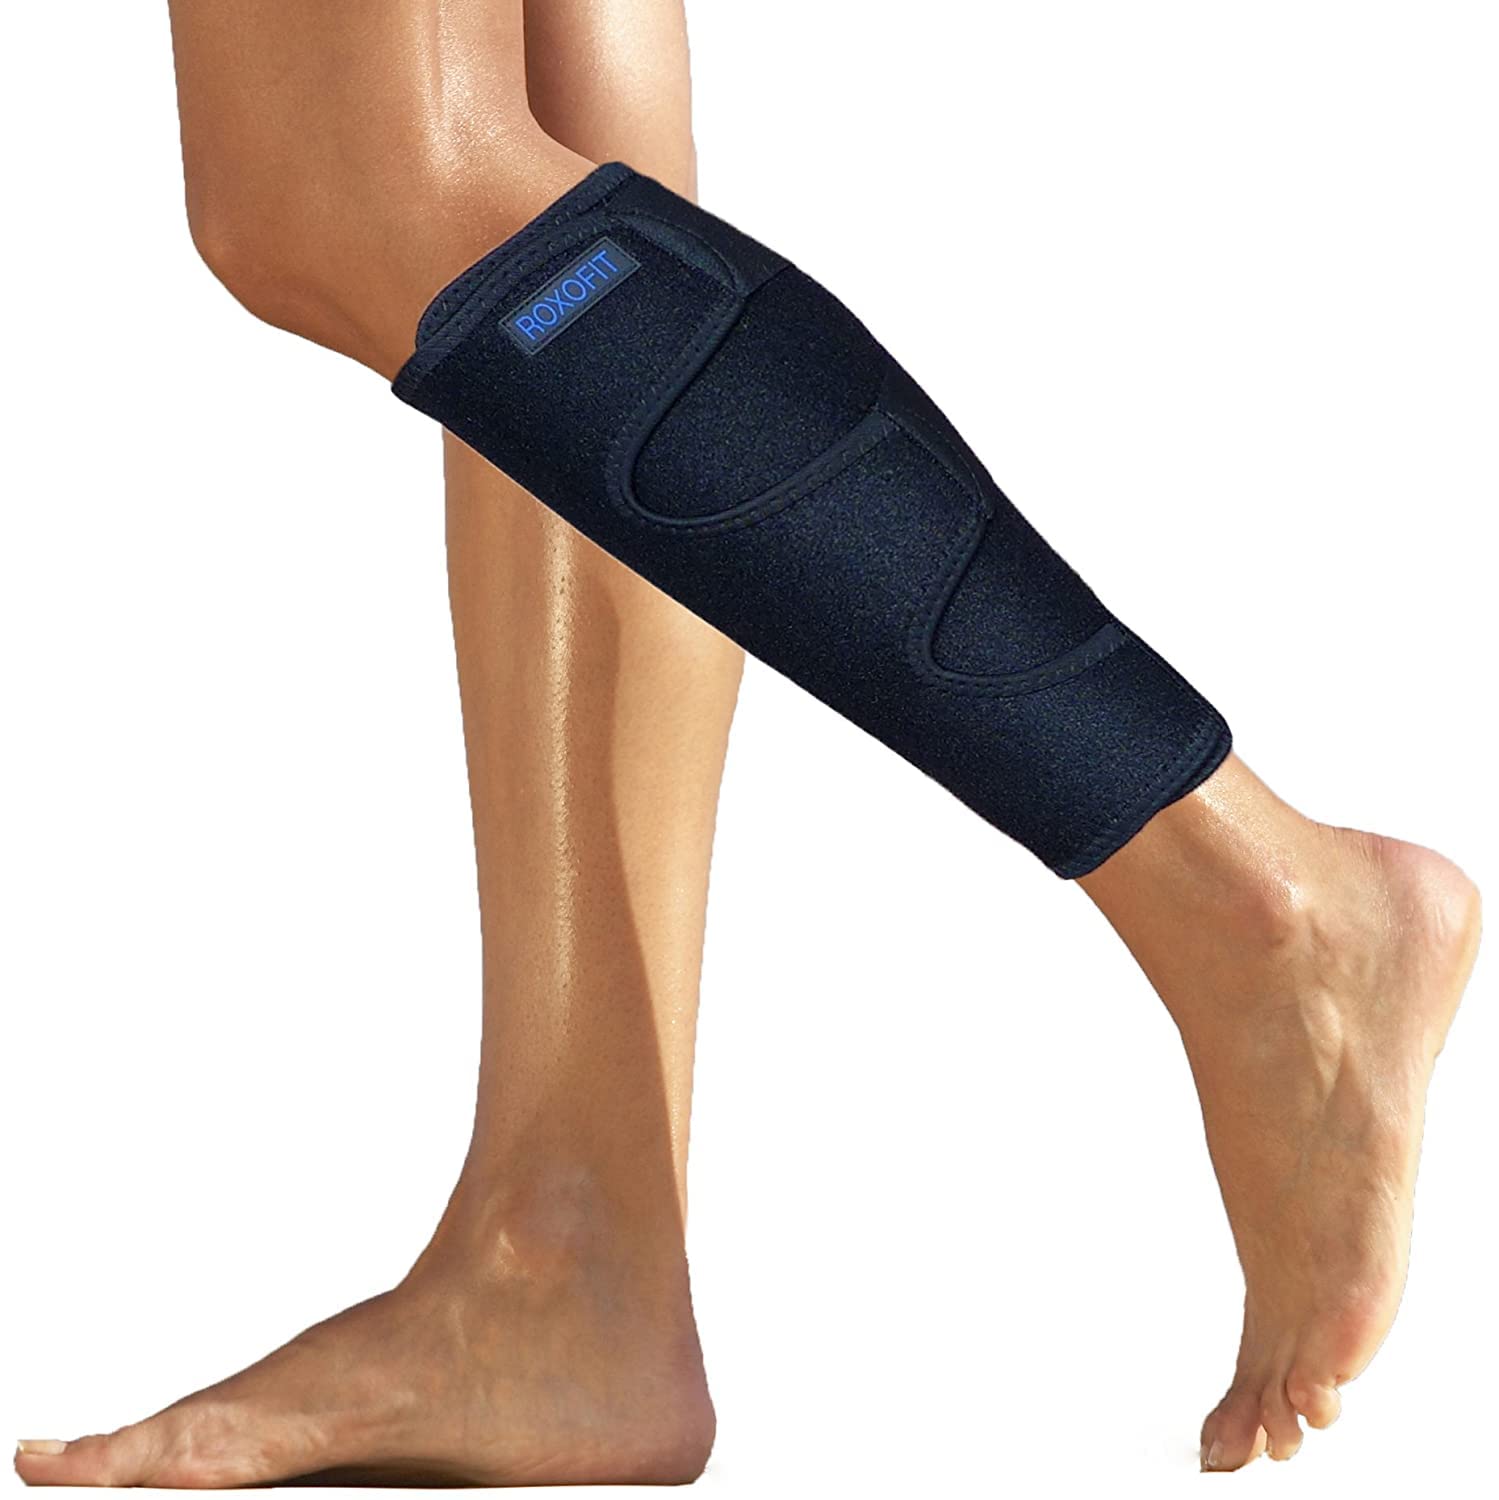 Calf Brace for Torn Calf Muscle and Shin Splint Relief - Calf Compression  Sleeve for Strain, Tear